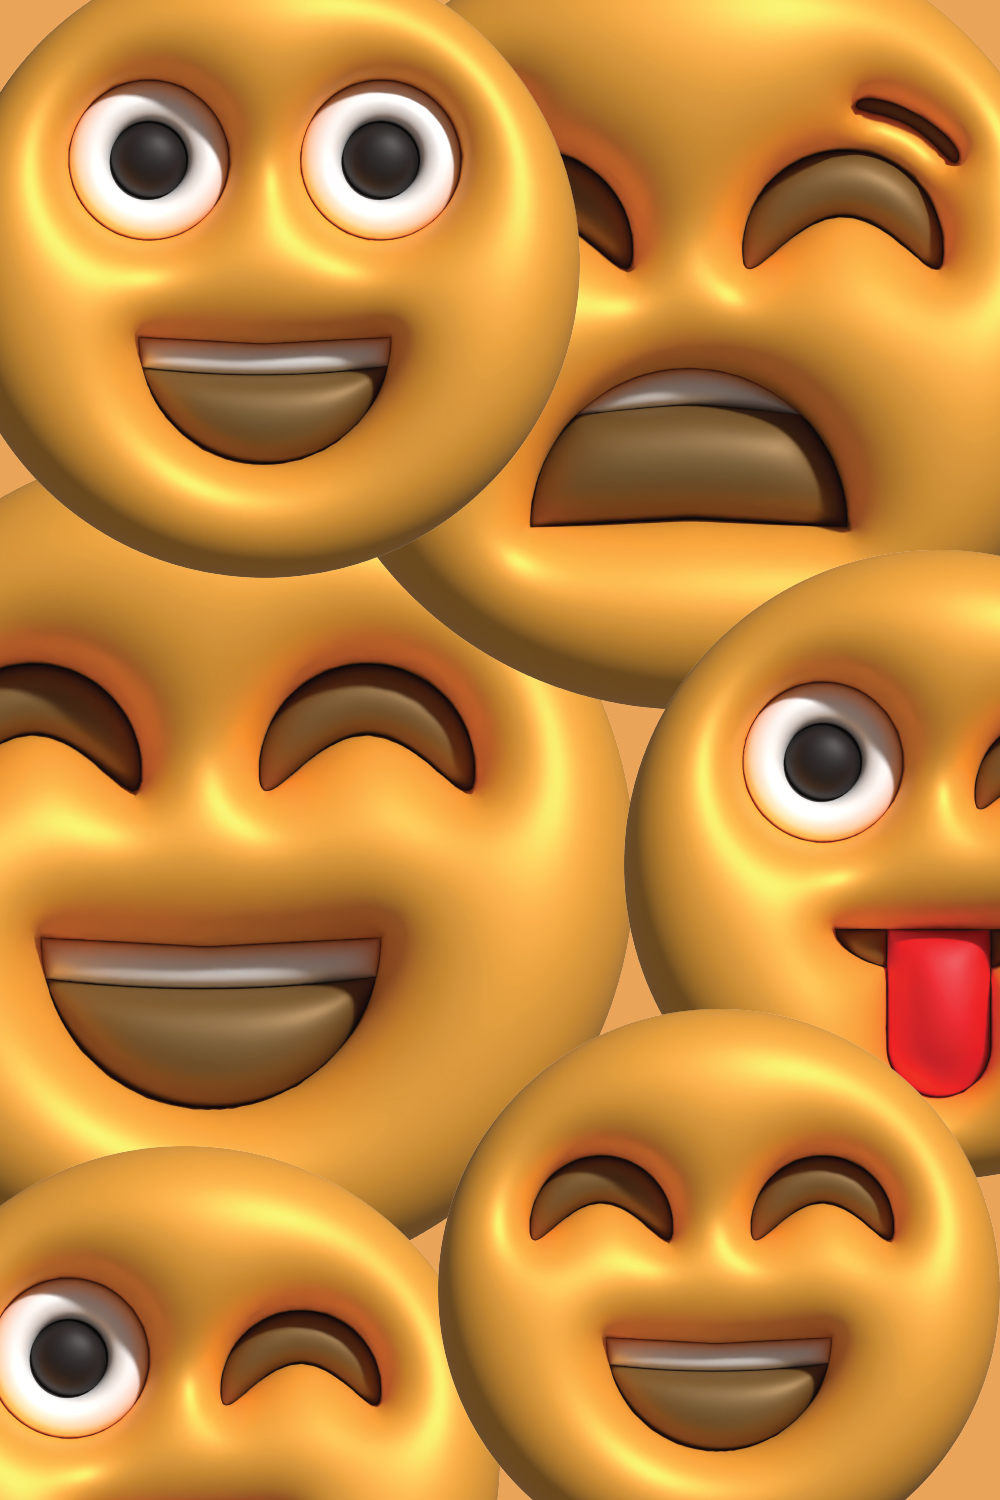 Bunch of emoticions with a tongue sticking out.